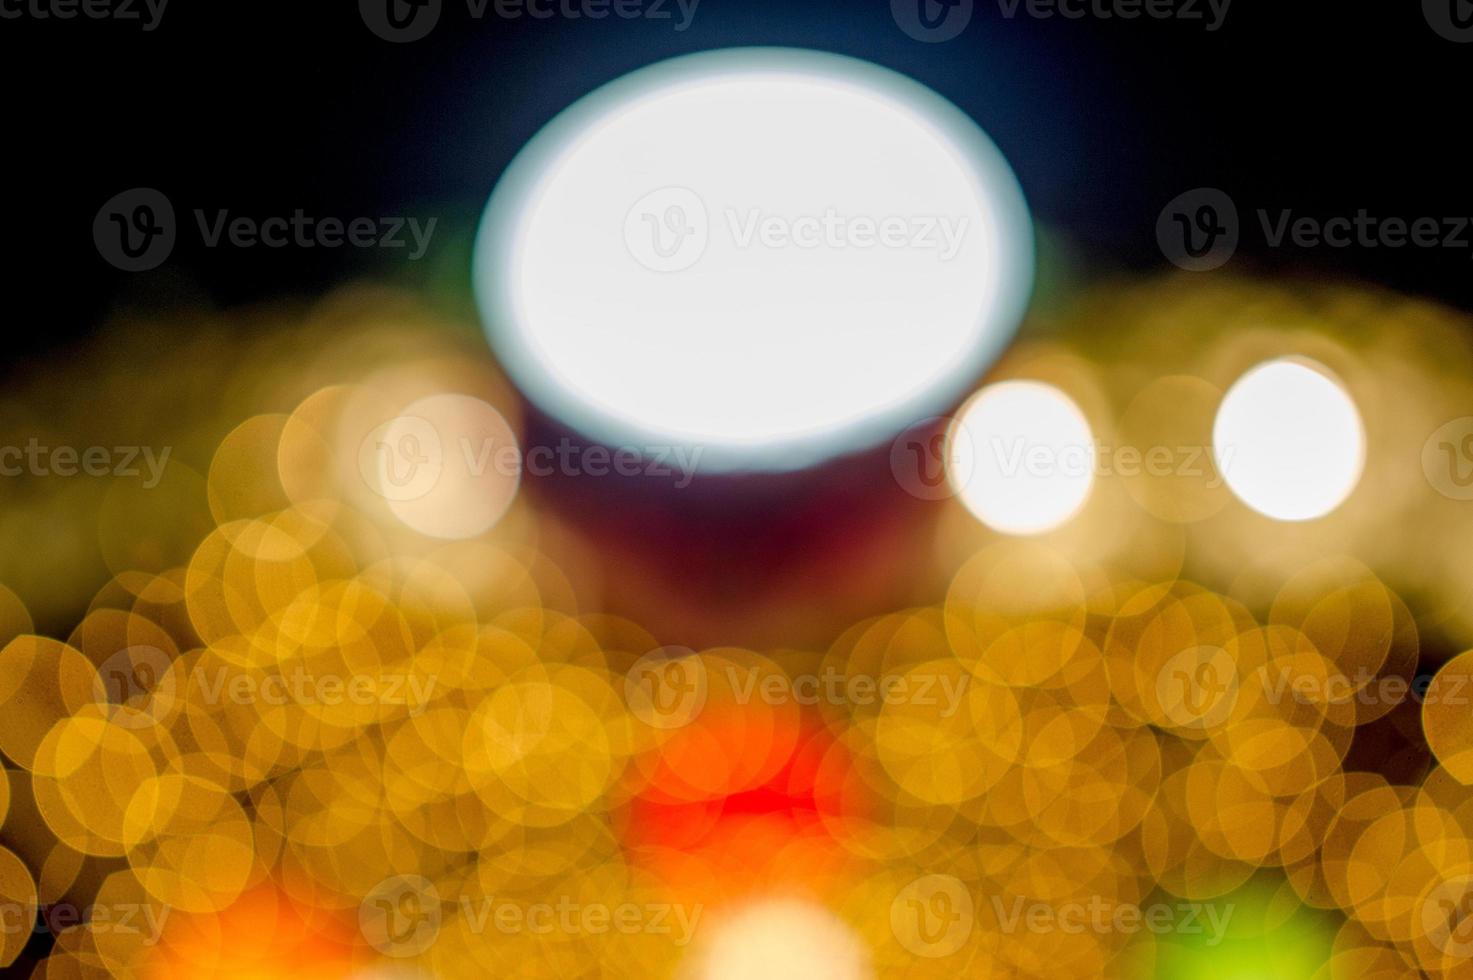 Colorful lights On New Year's Day, Bokeh circle lights, background image with copy space. photo